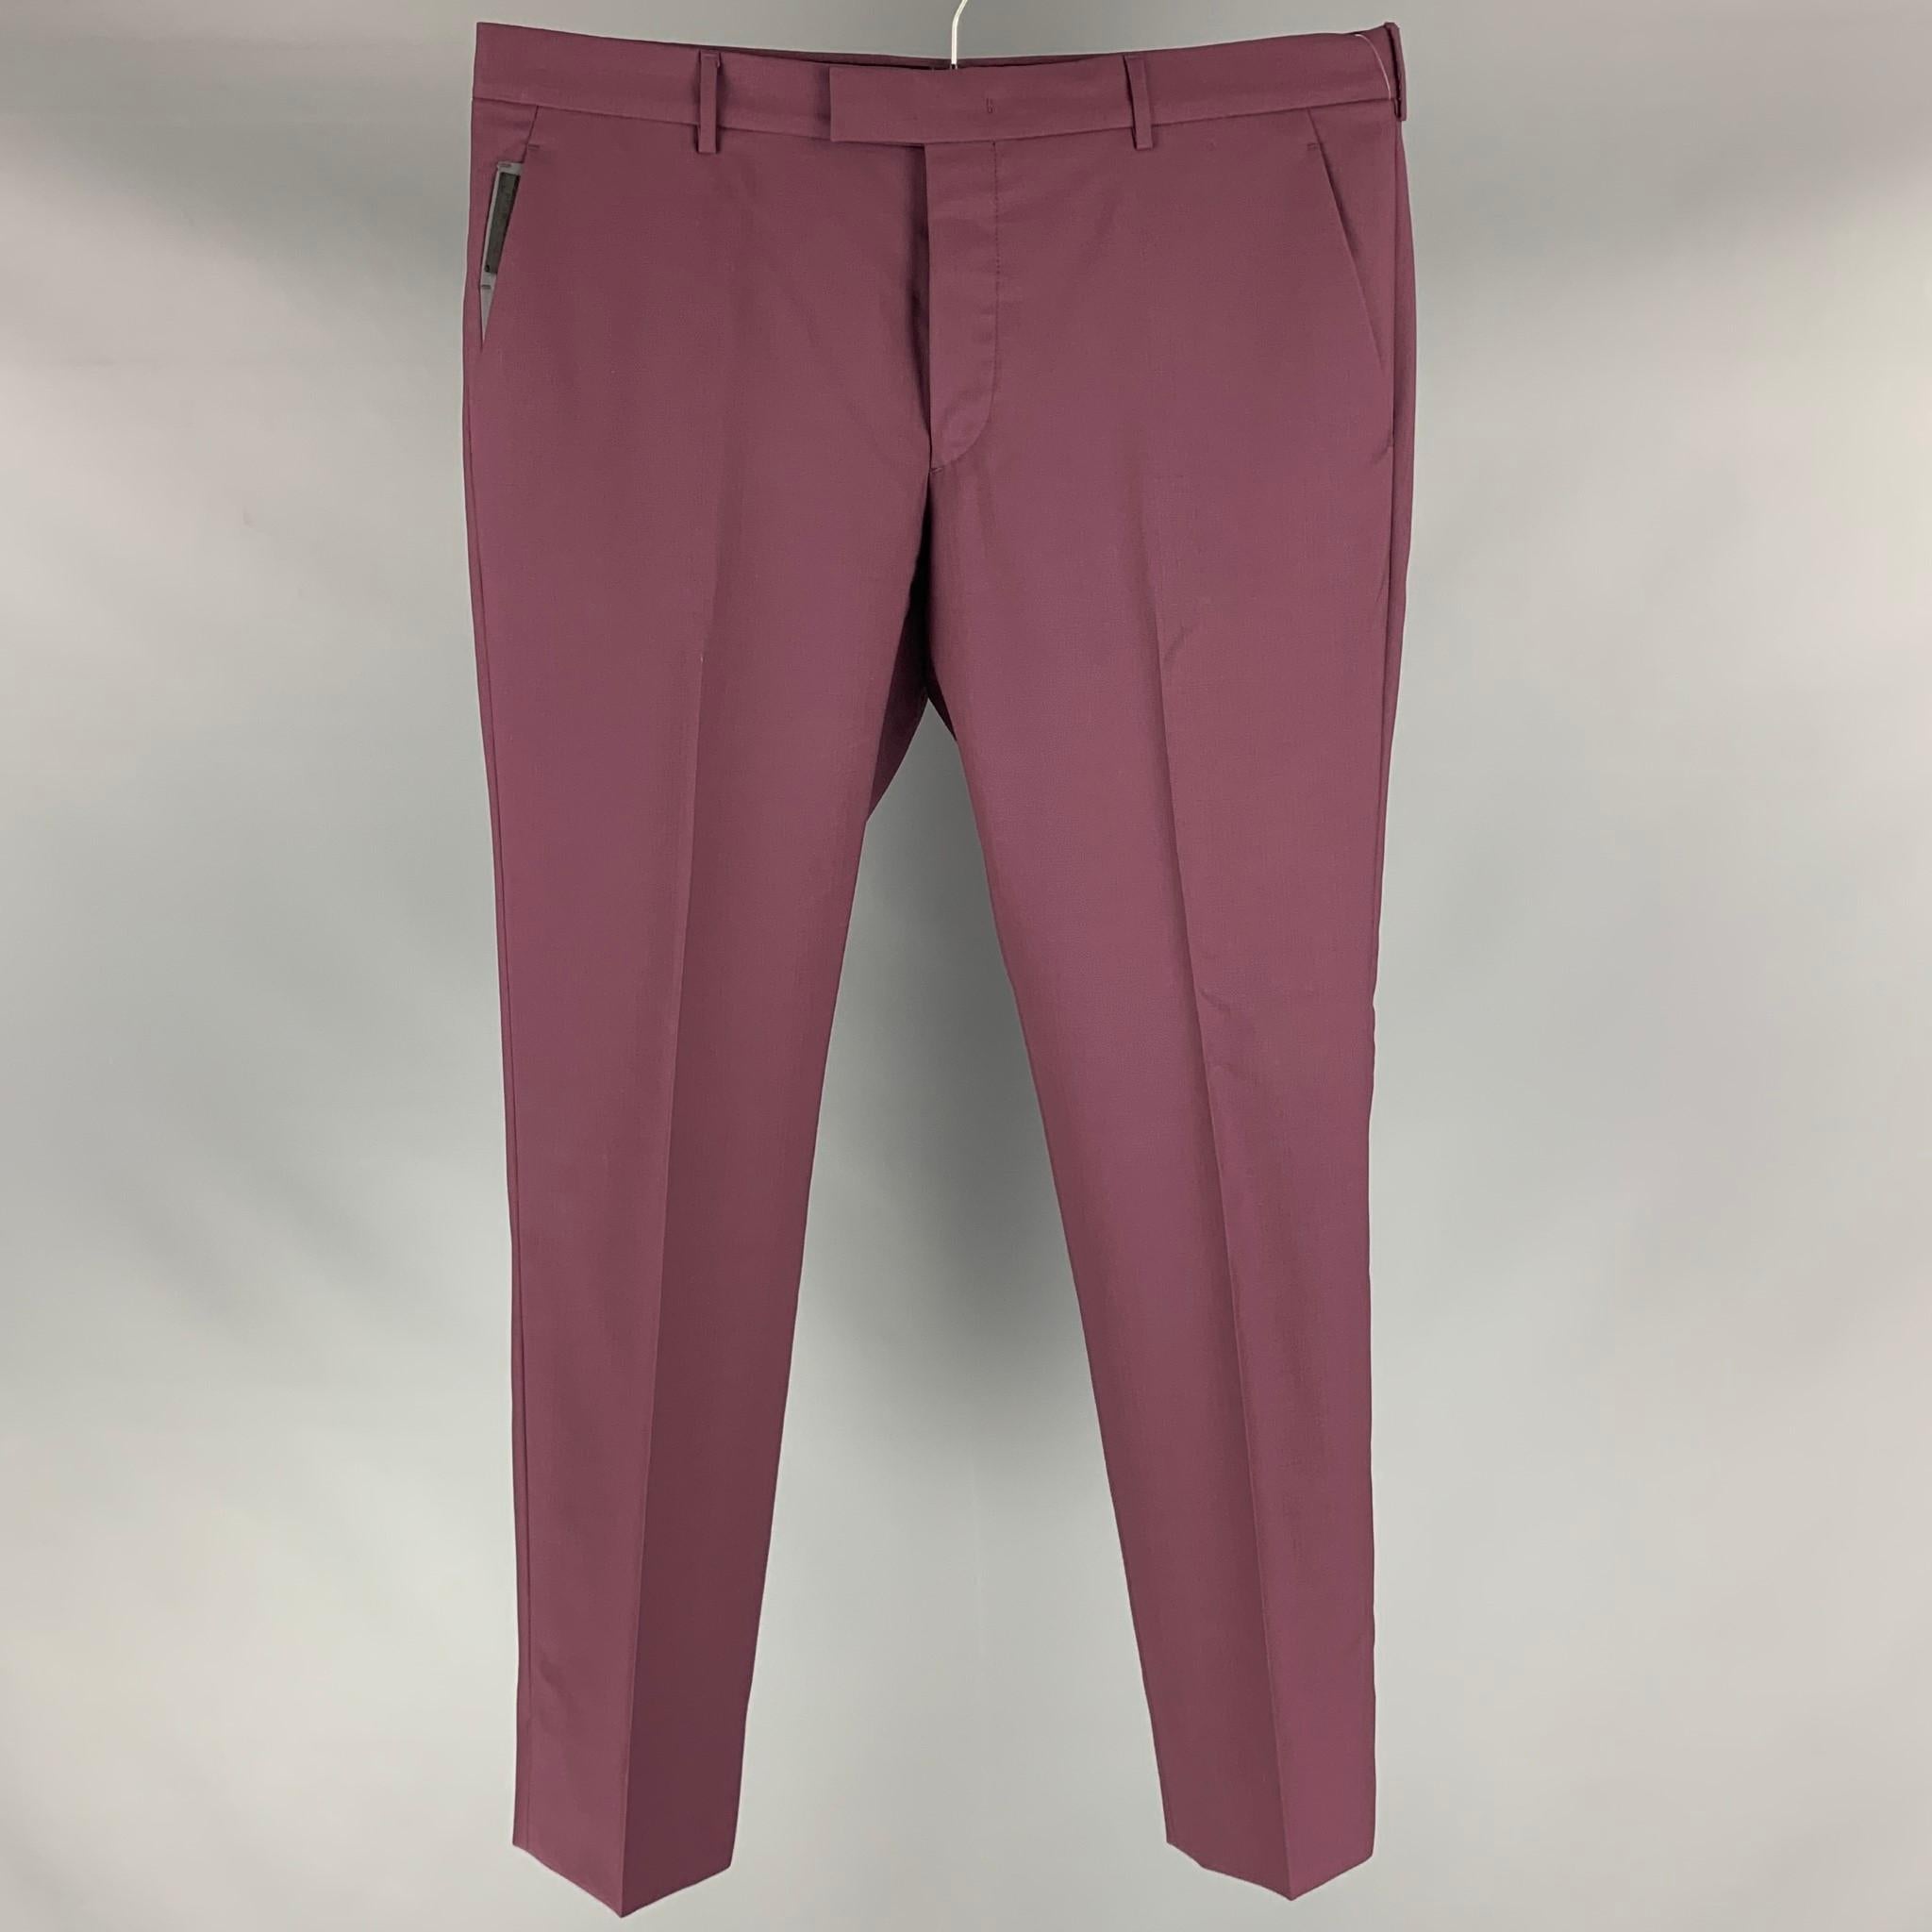 PRADA dress pants comes in purple mohair and wool featuring a flat front, front tab, and a zip fly closure. Made in Italy.

Excellent Pre-Owned Condition.
Marked: 52

Measurements:

Waist: 38 in.
Rise: 10 in.
Inseam: 32 in.
Leg Opening: 15 in. 

